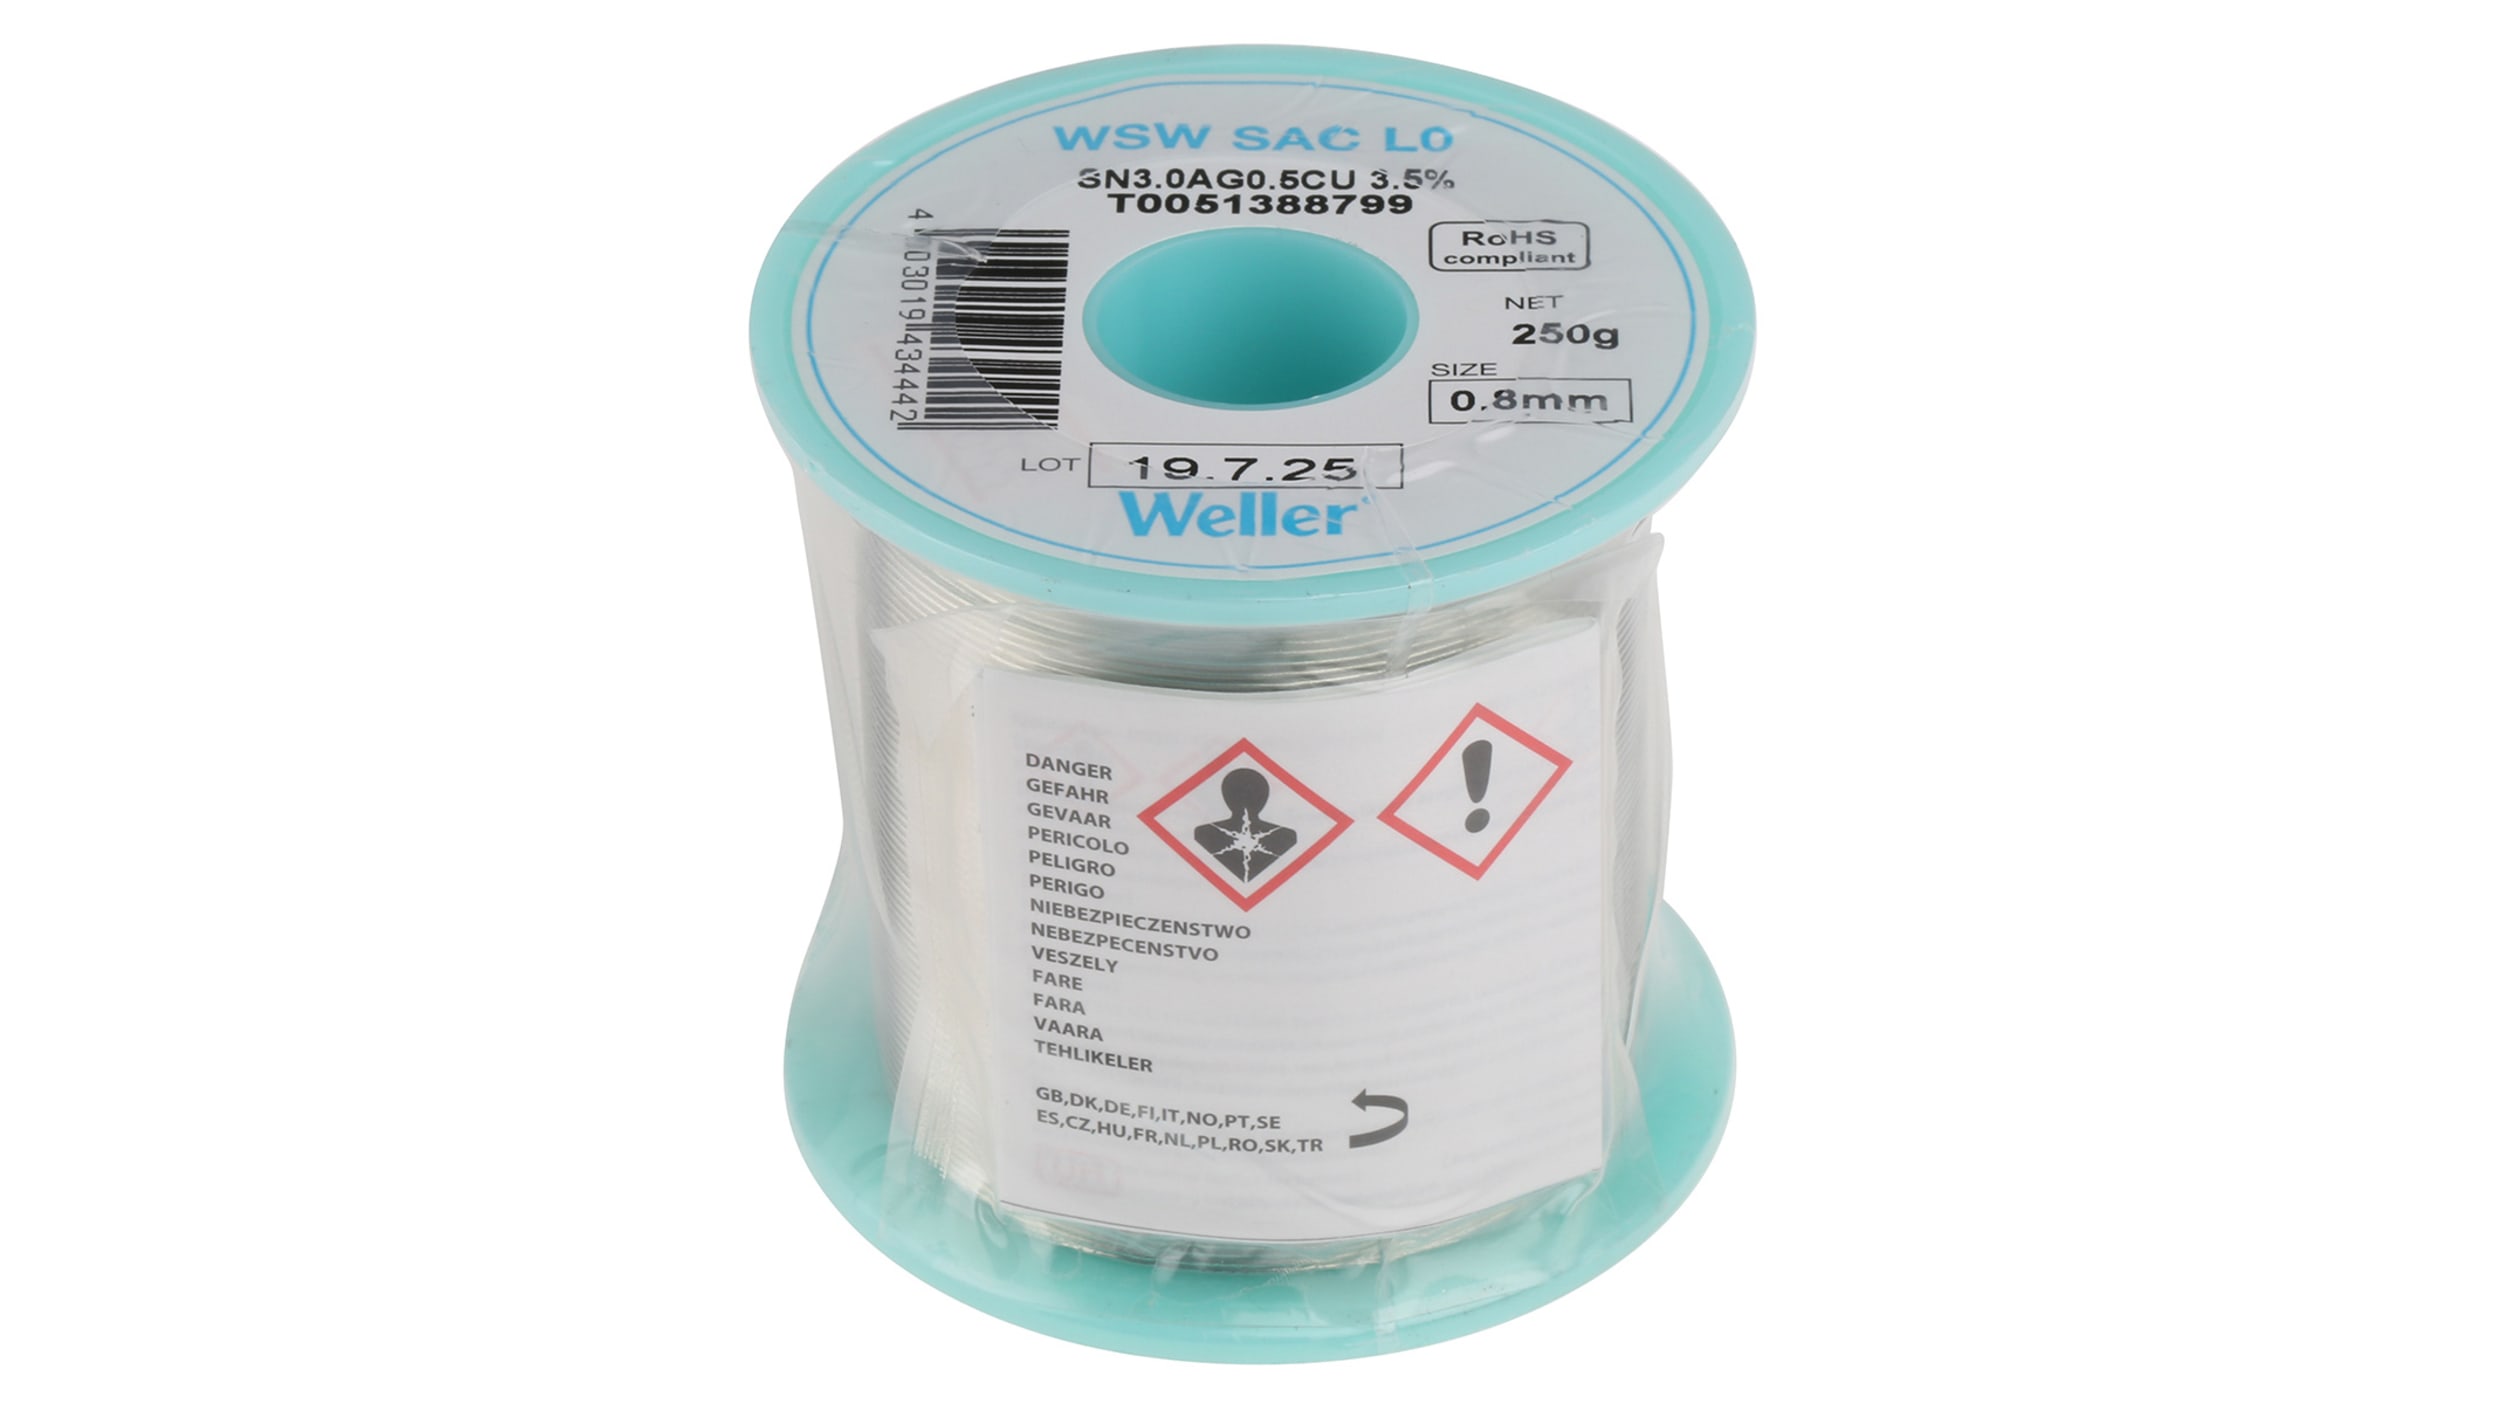 T0051388399 | WSW SAC L0 solder wire 0.3mm, 100g Sn3.0Ag0.5Cu